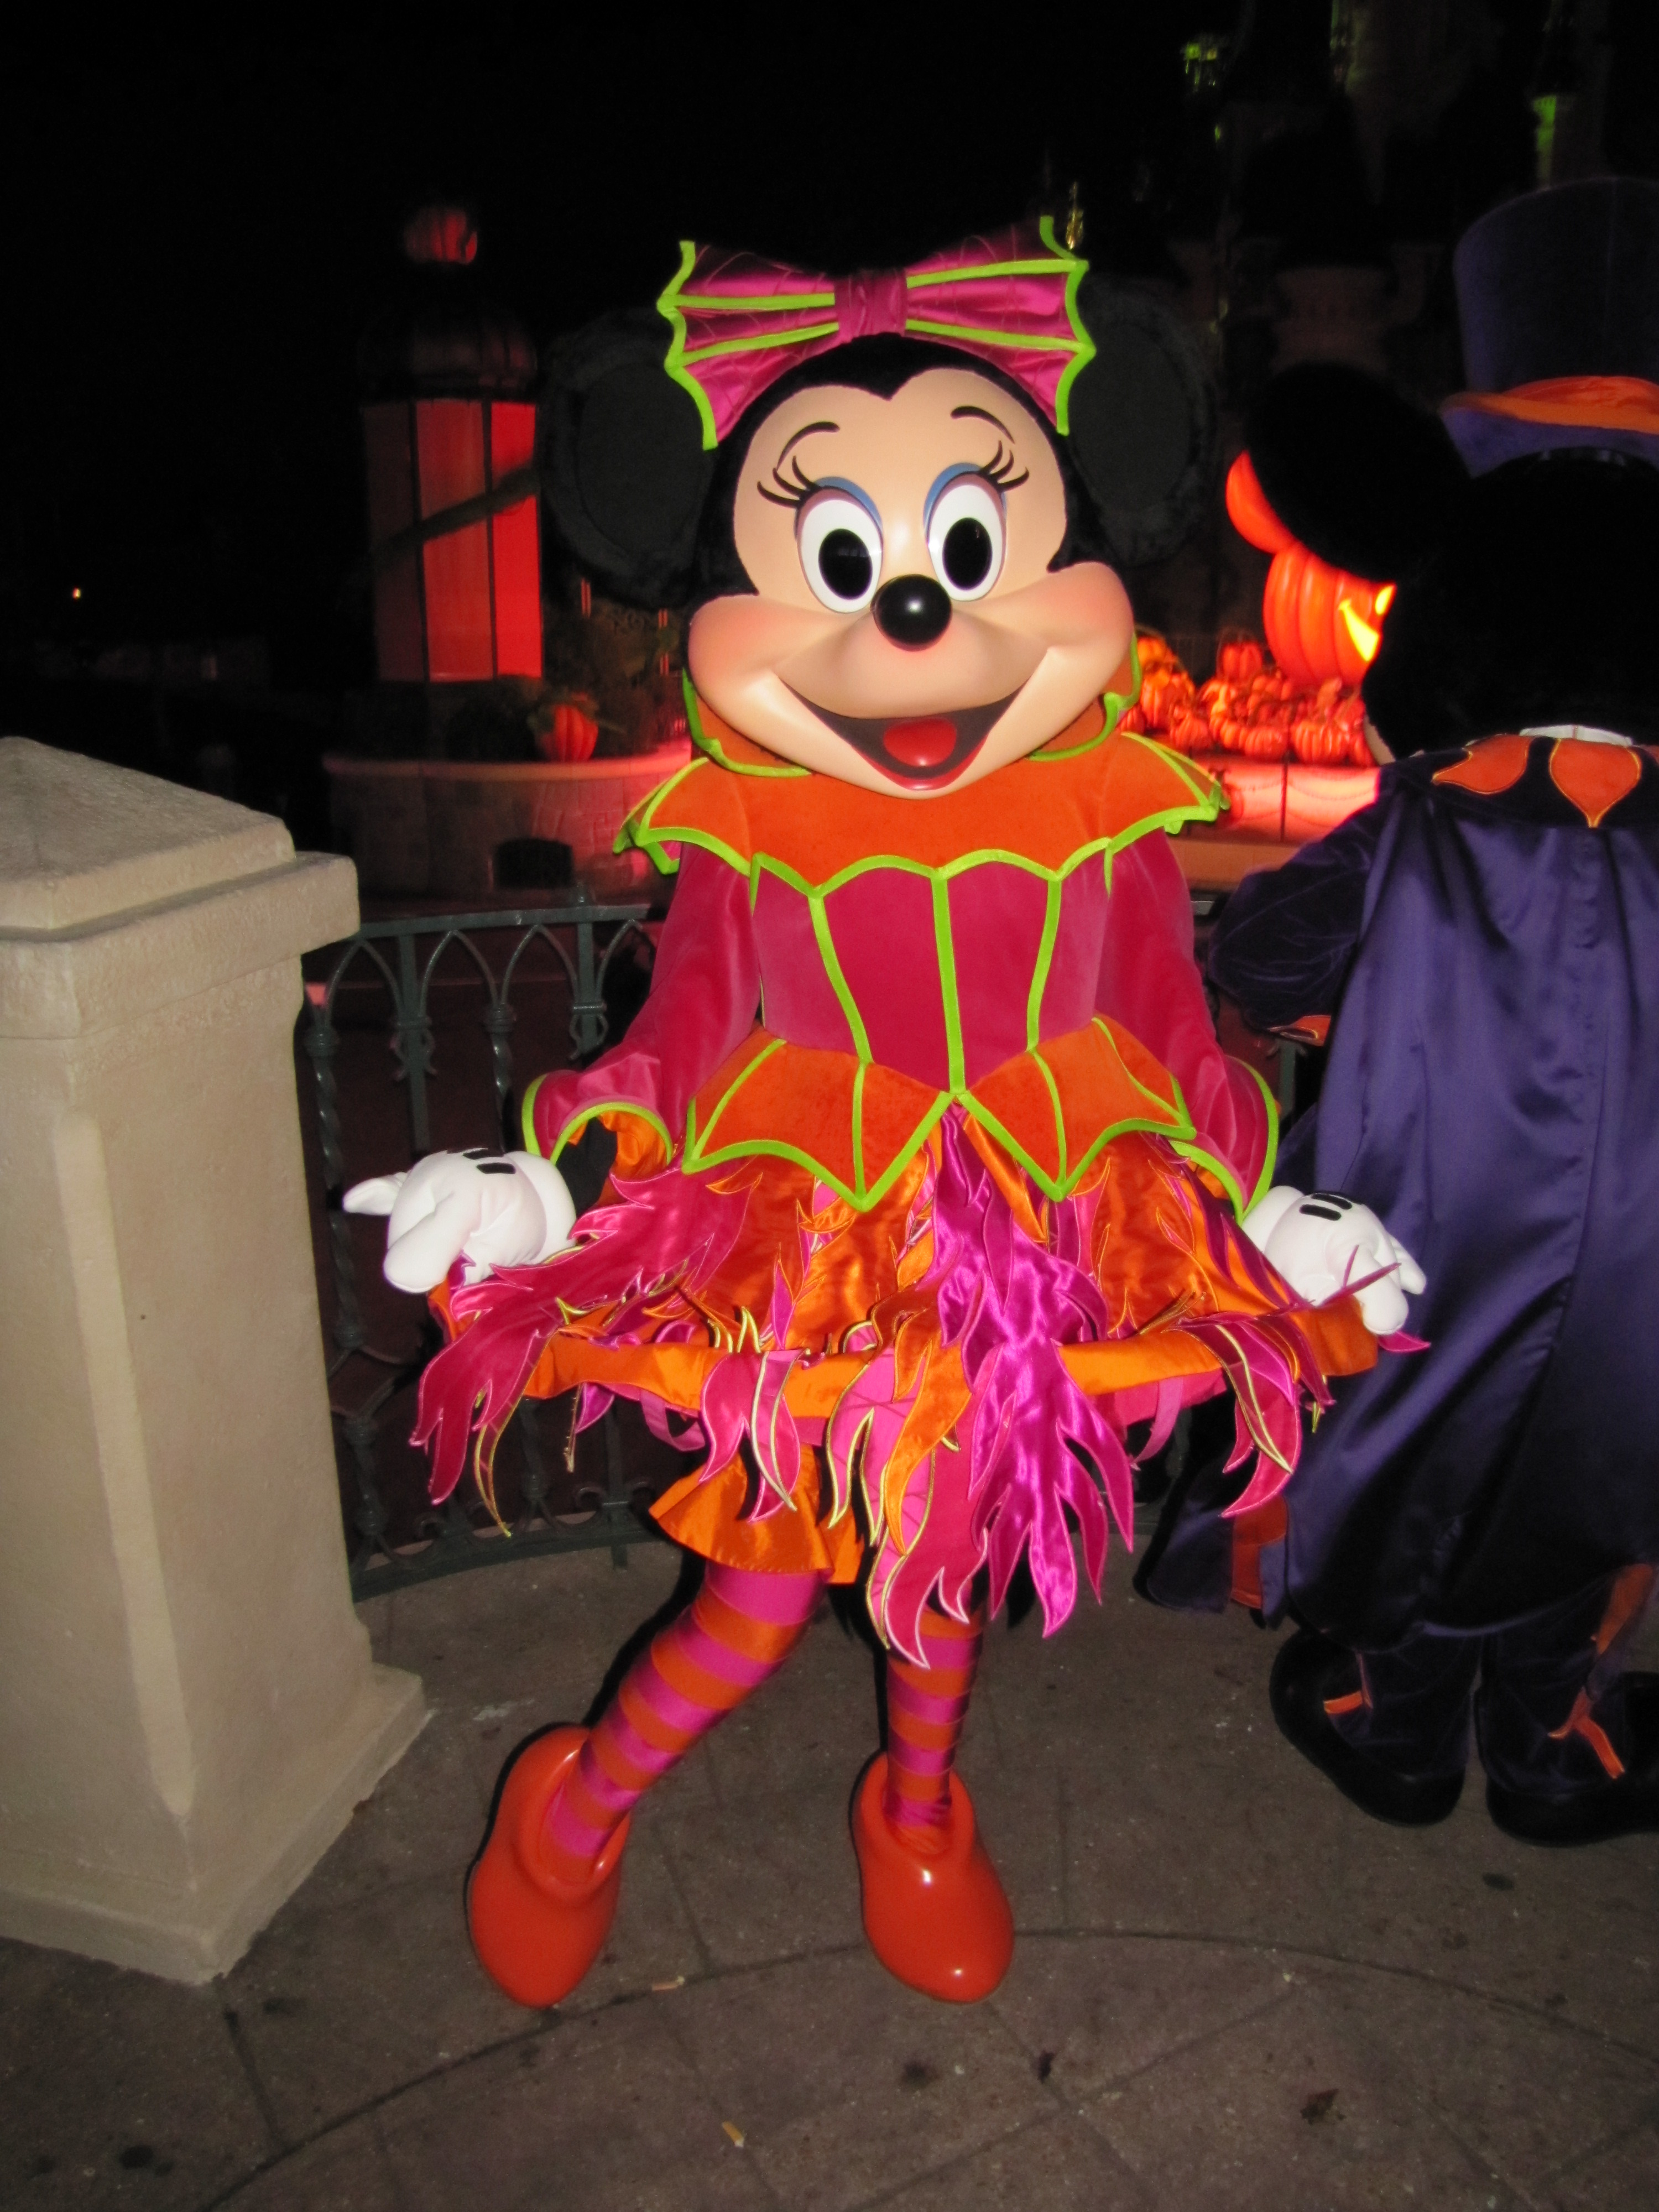 Minnie wore this outfit at the Halloween Show during Halloween Season 2011 & 2012 and the 2012 Halloween Party.